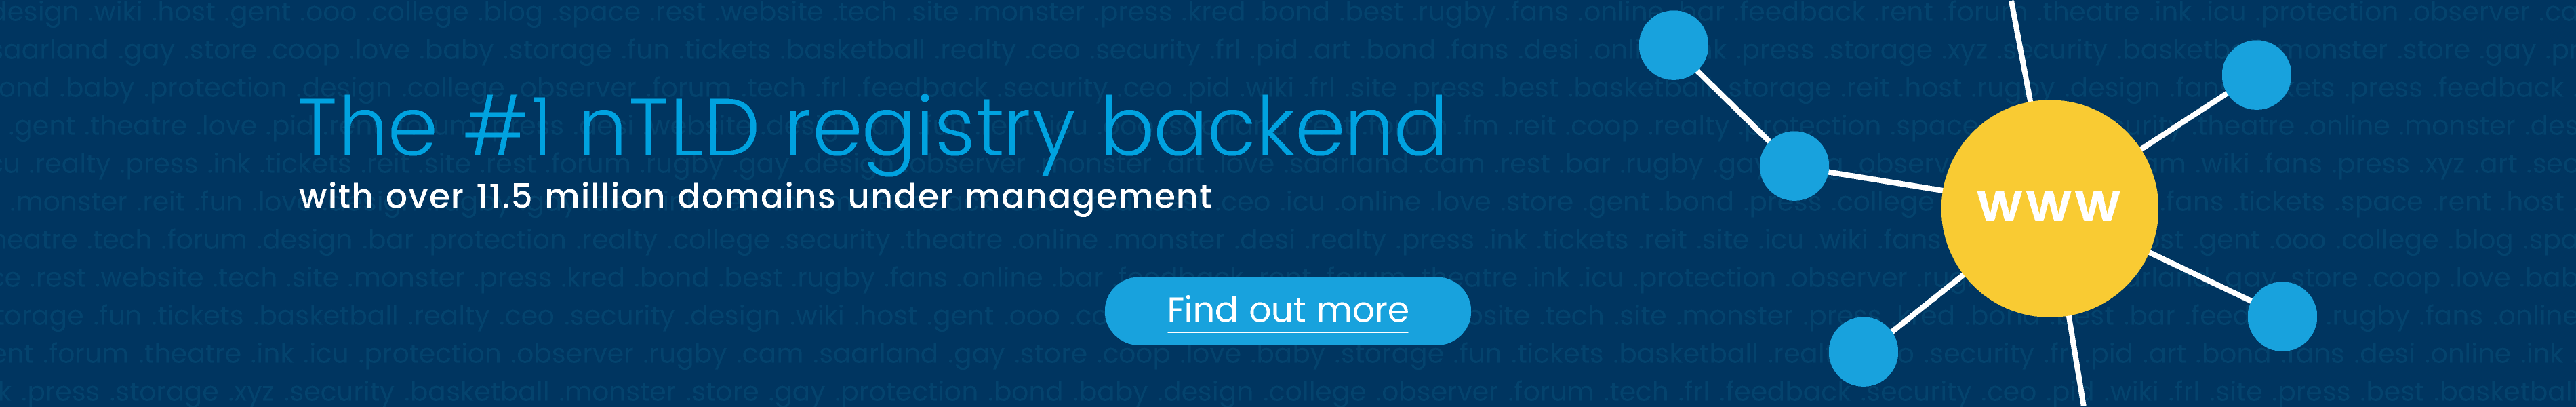 The #1 gTLD registry backend with over 11.5 million domains under management